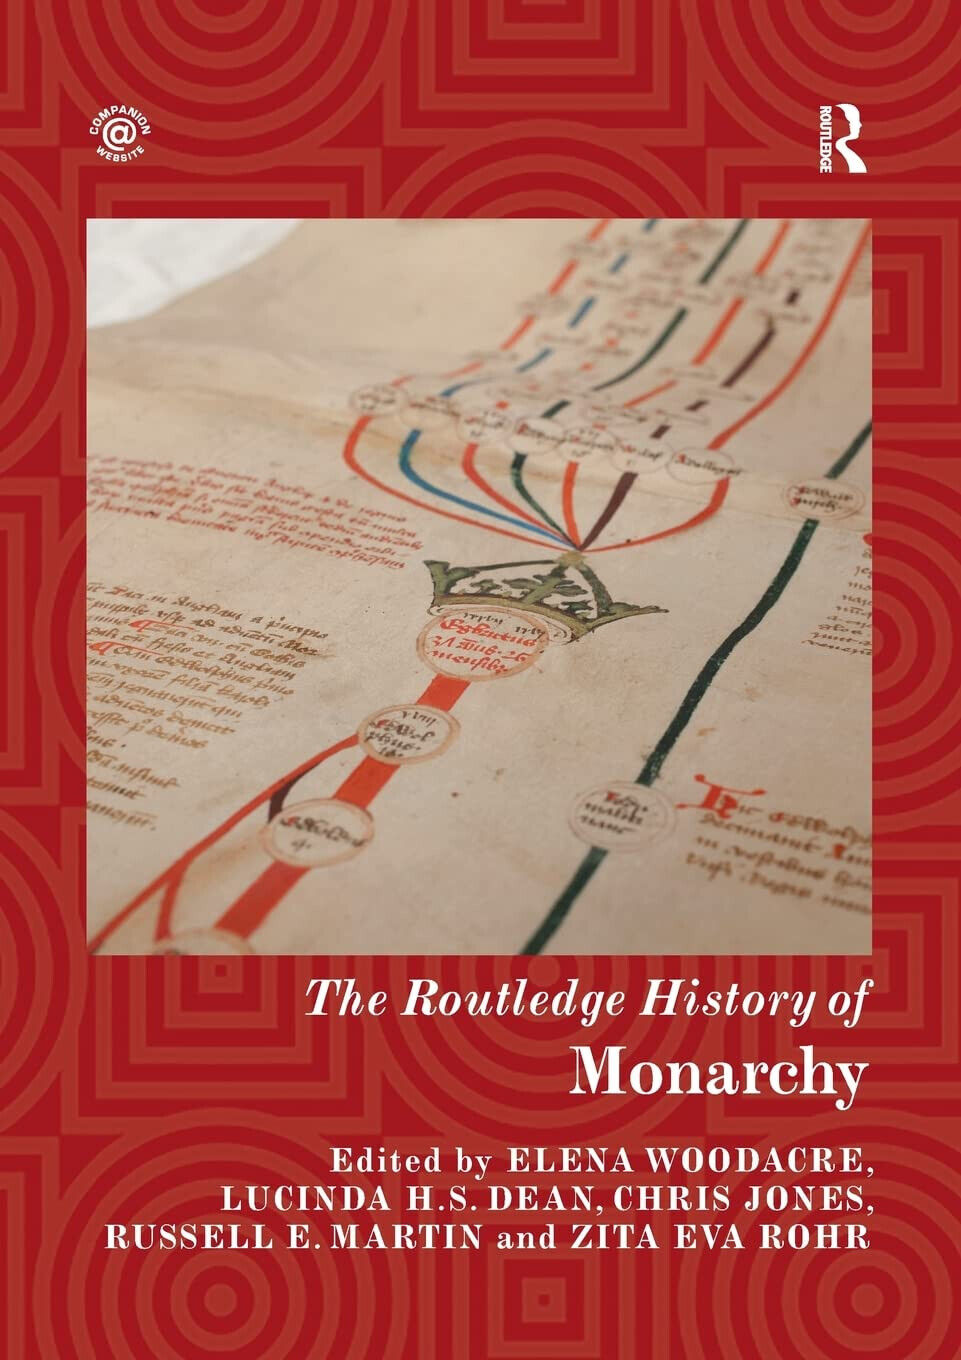 The Routledge History Of Monarchy - Elena Woodacre - Routledge, 2021